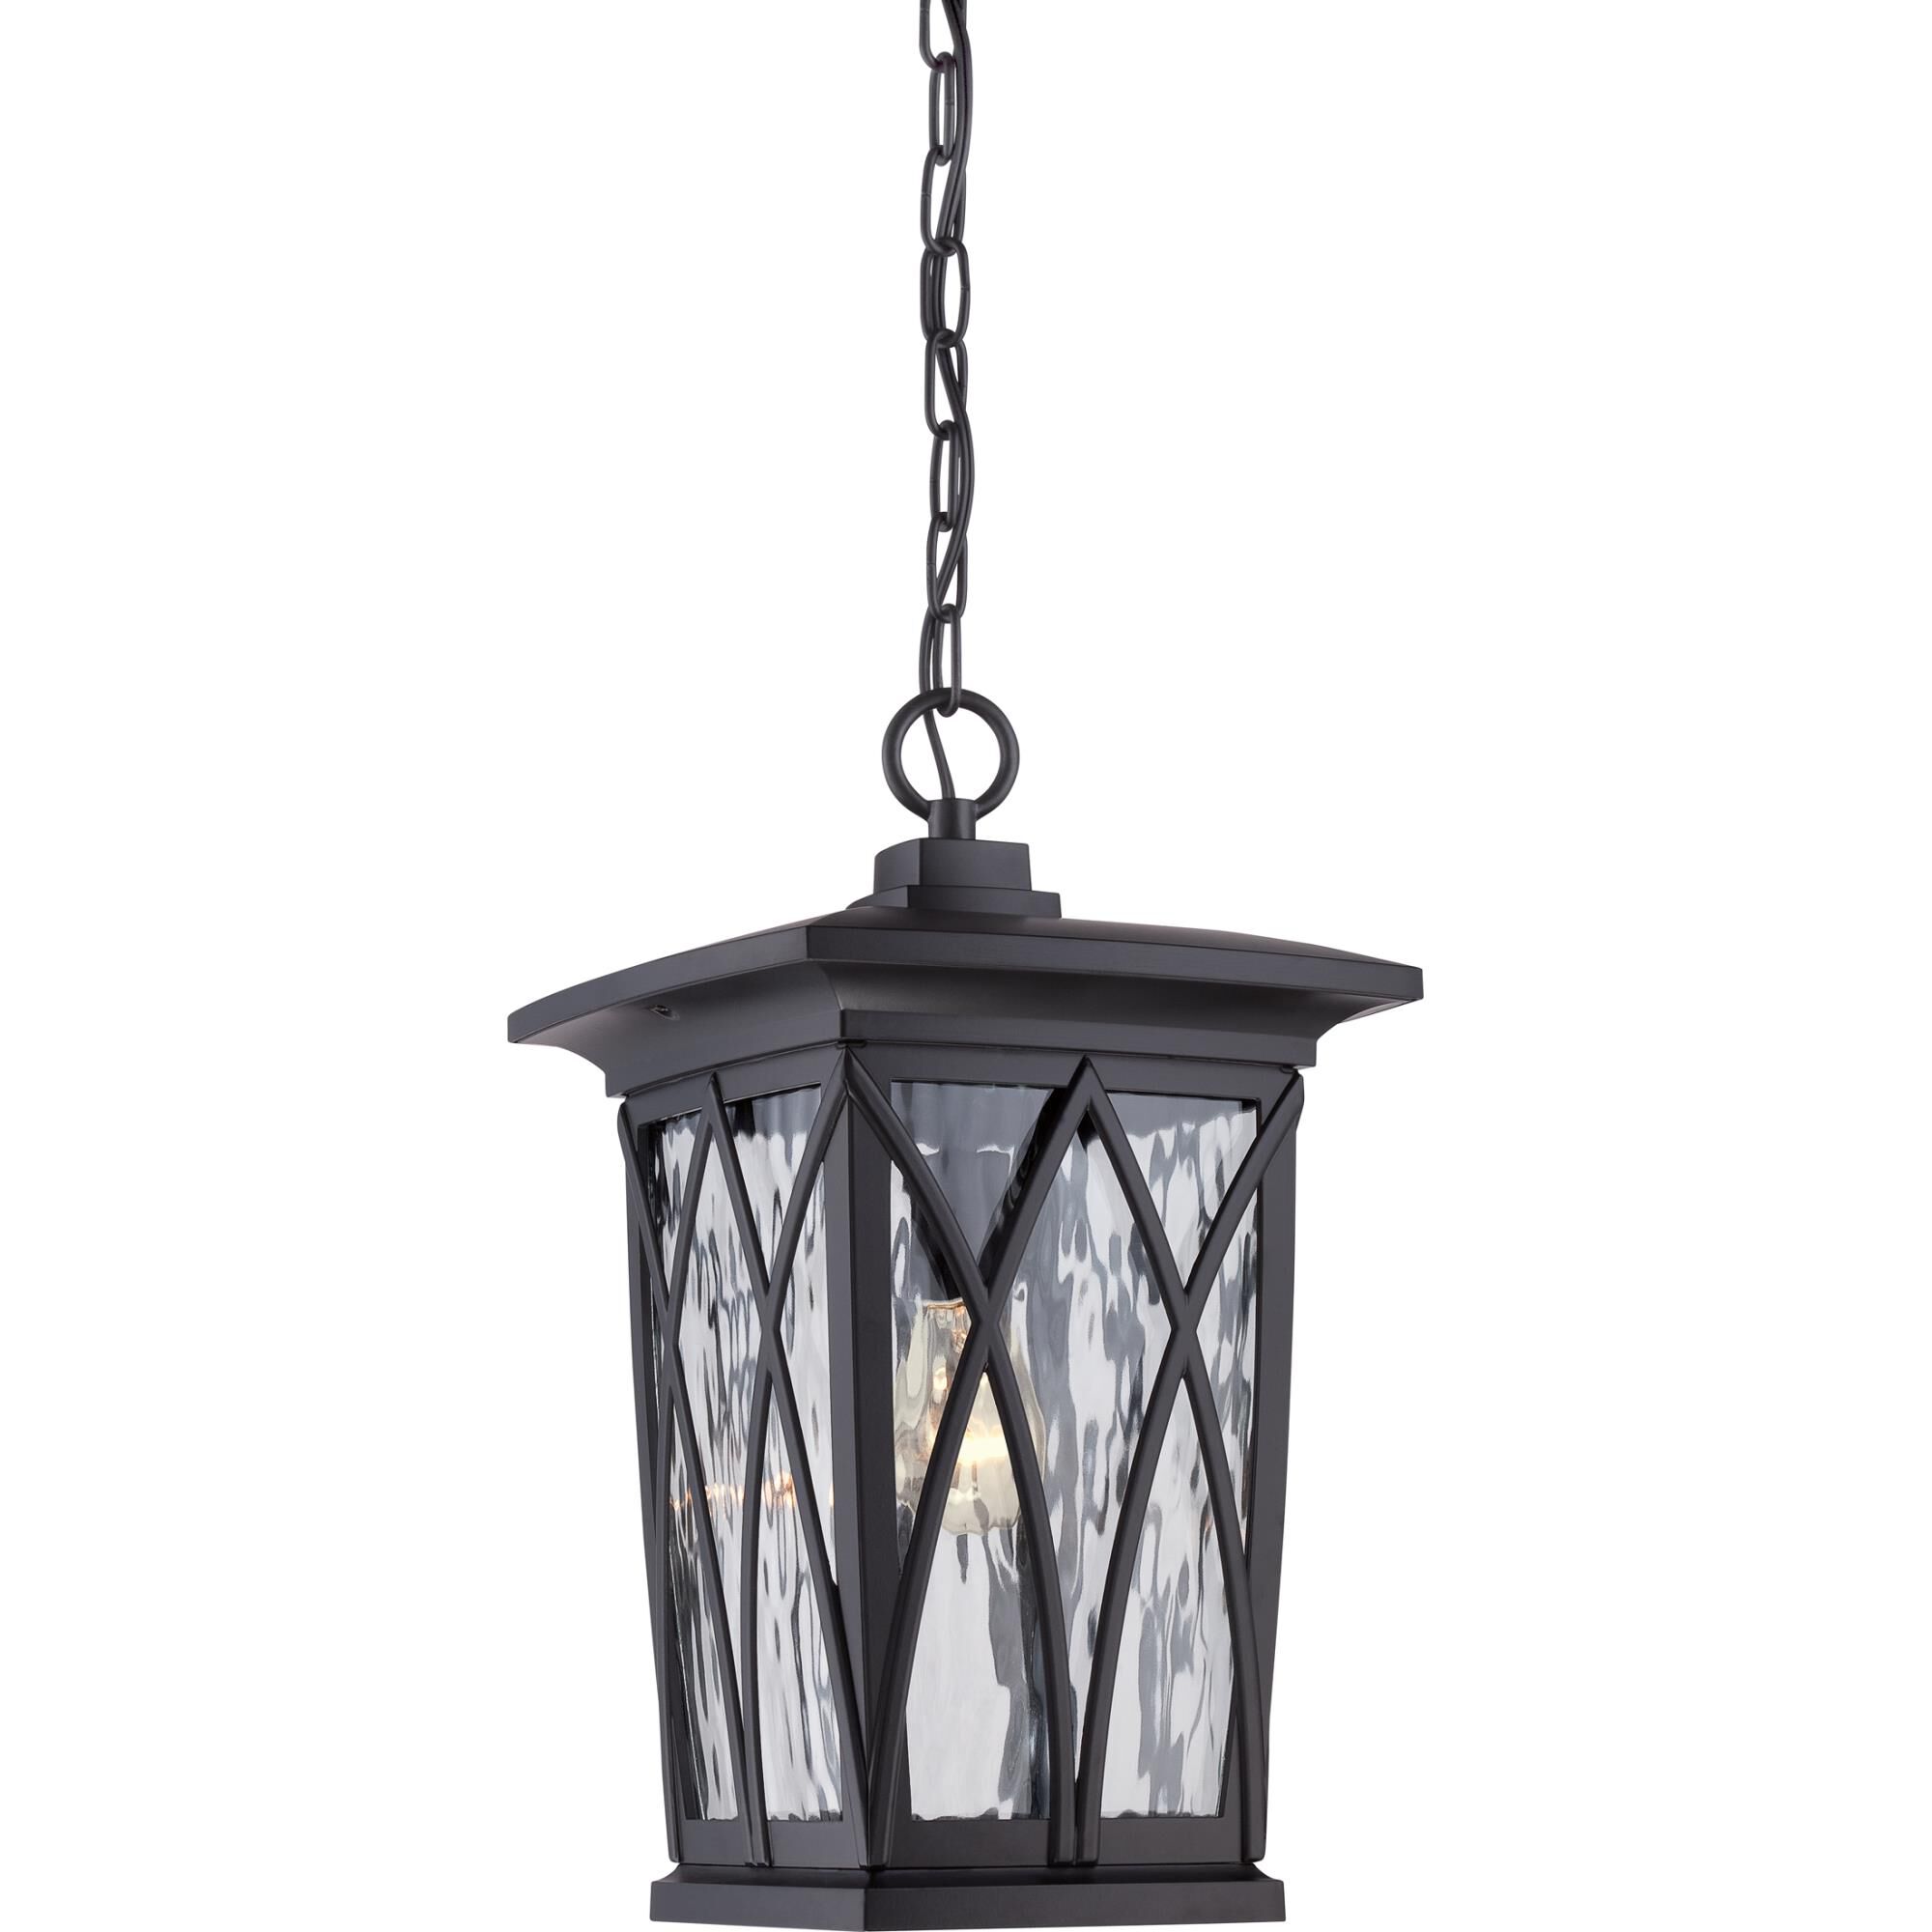 Photos - Chandelier / Lamp Quoizel Grover 17 Inch Tall Outdoor Hanging Lantern Grover - GVR1910K - Tr 